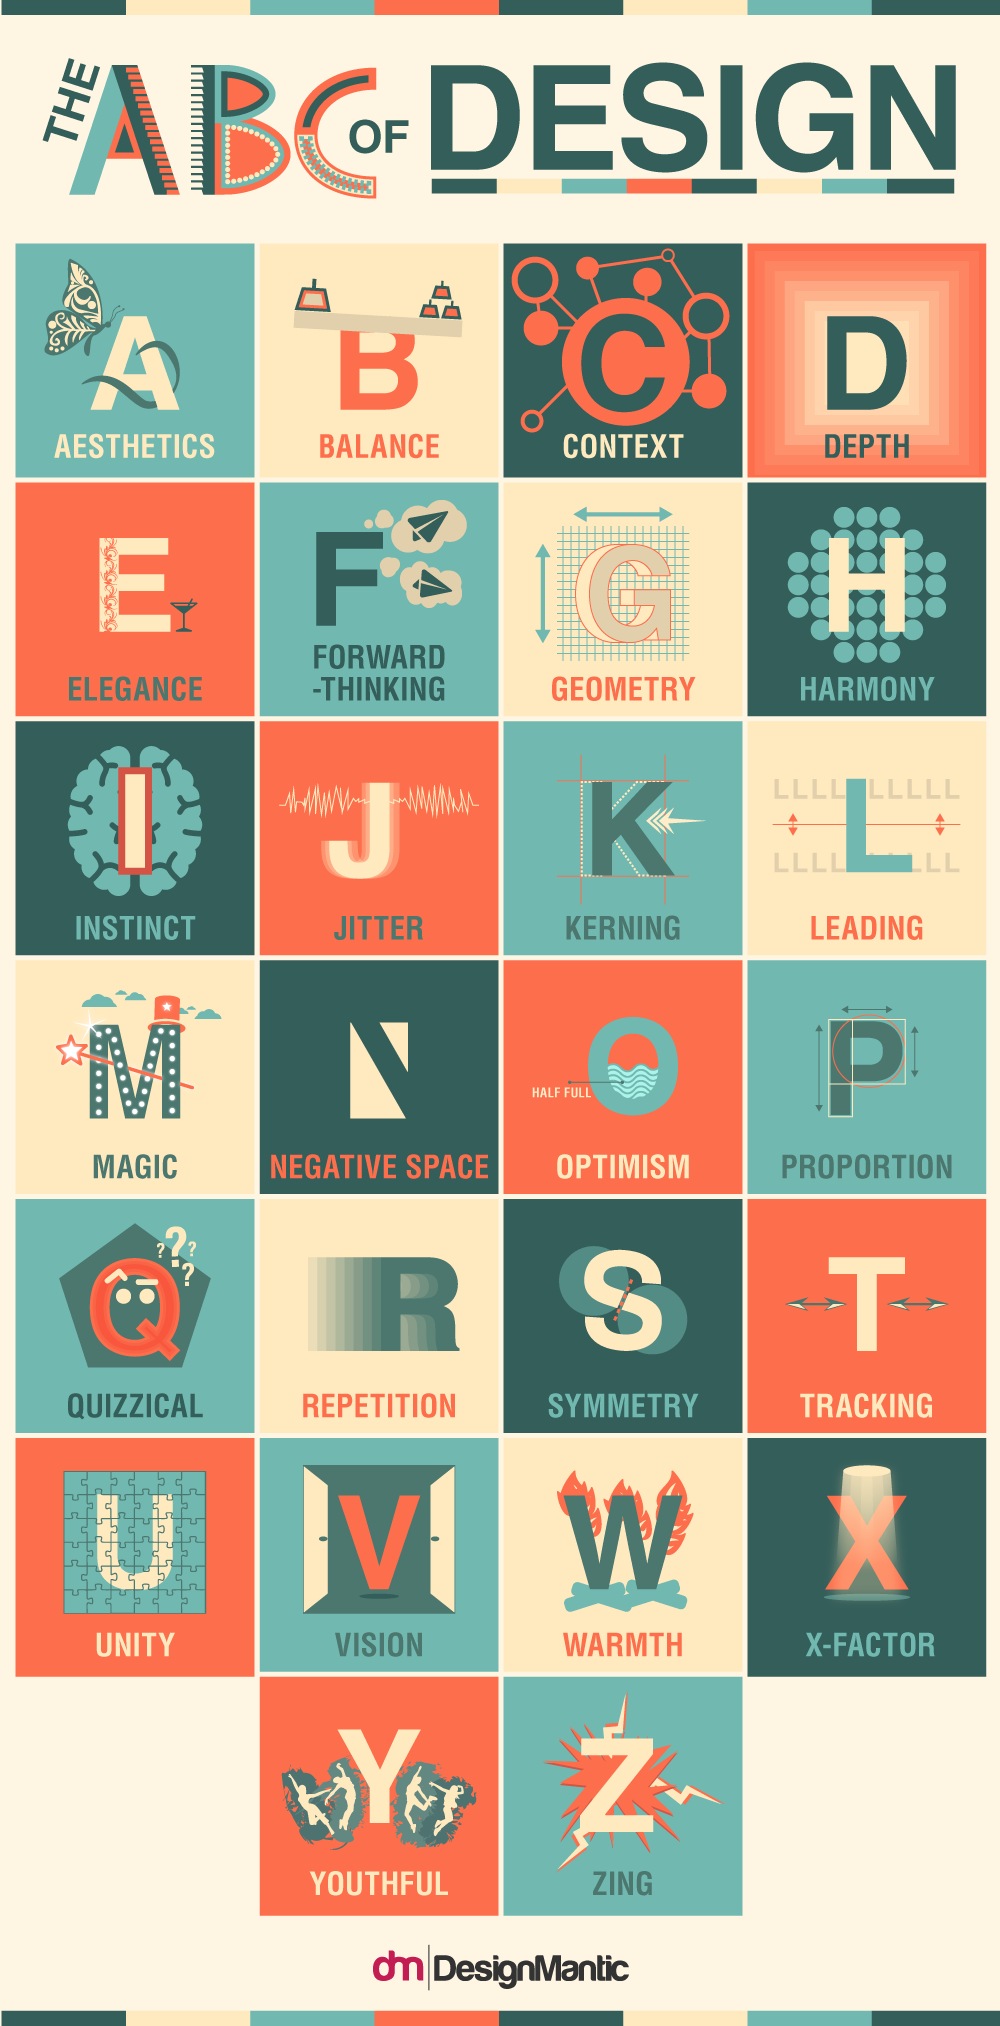 101 Best Infographic Examples for Beginners (2021 List) | Infographic examples, Web design ...